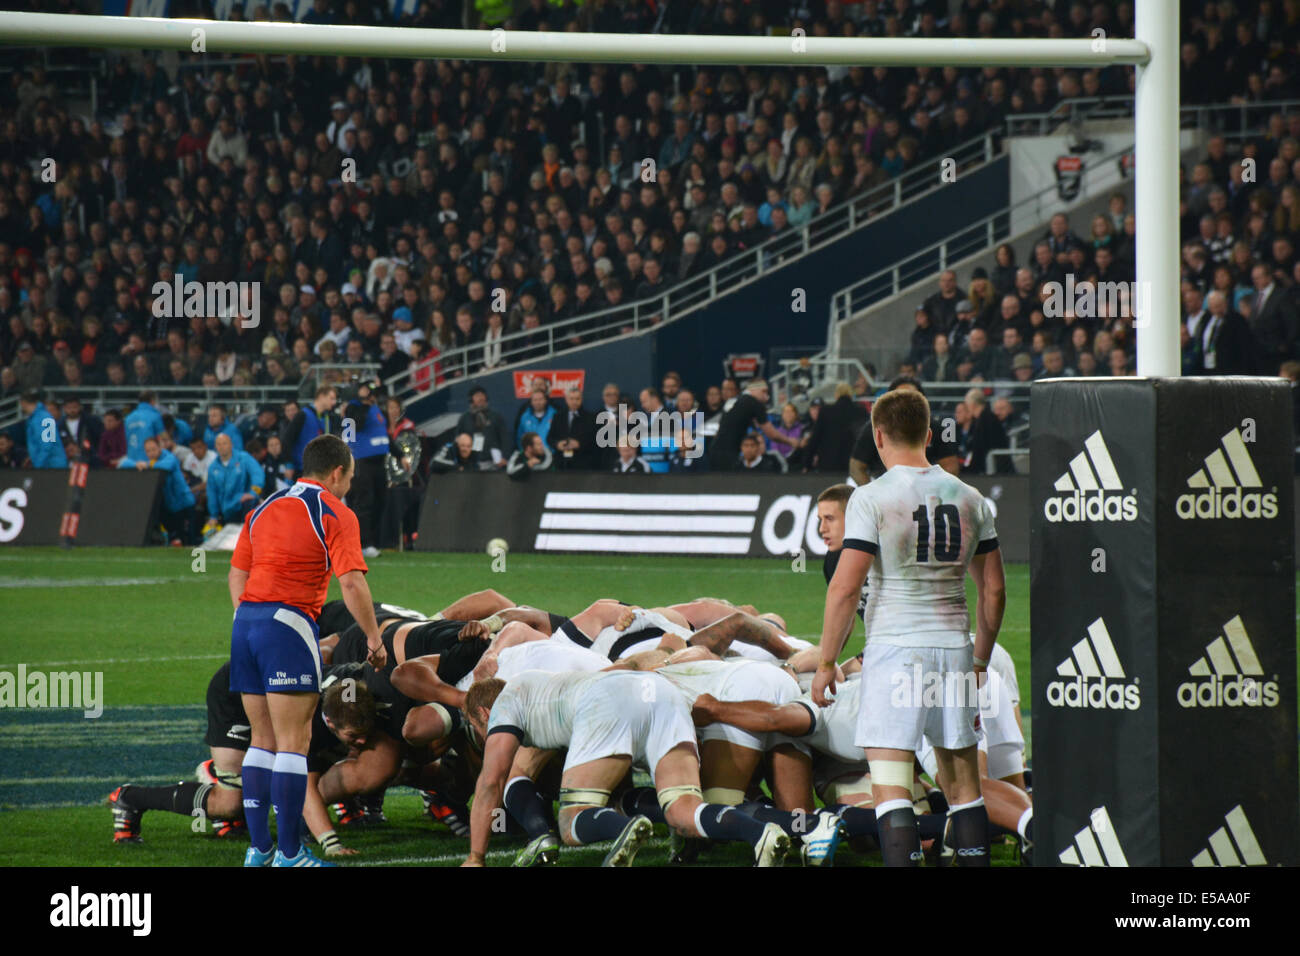 Rugby scrum during the All Blacks Vs England game in the Forsyth Barr Stadium, Dunedin,  played on June 14, 2014 Stock Photo